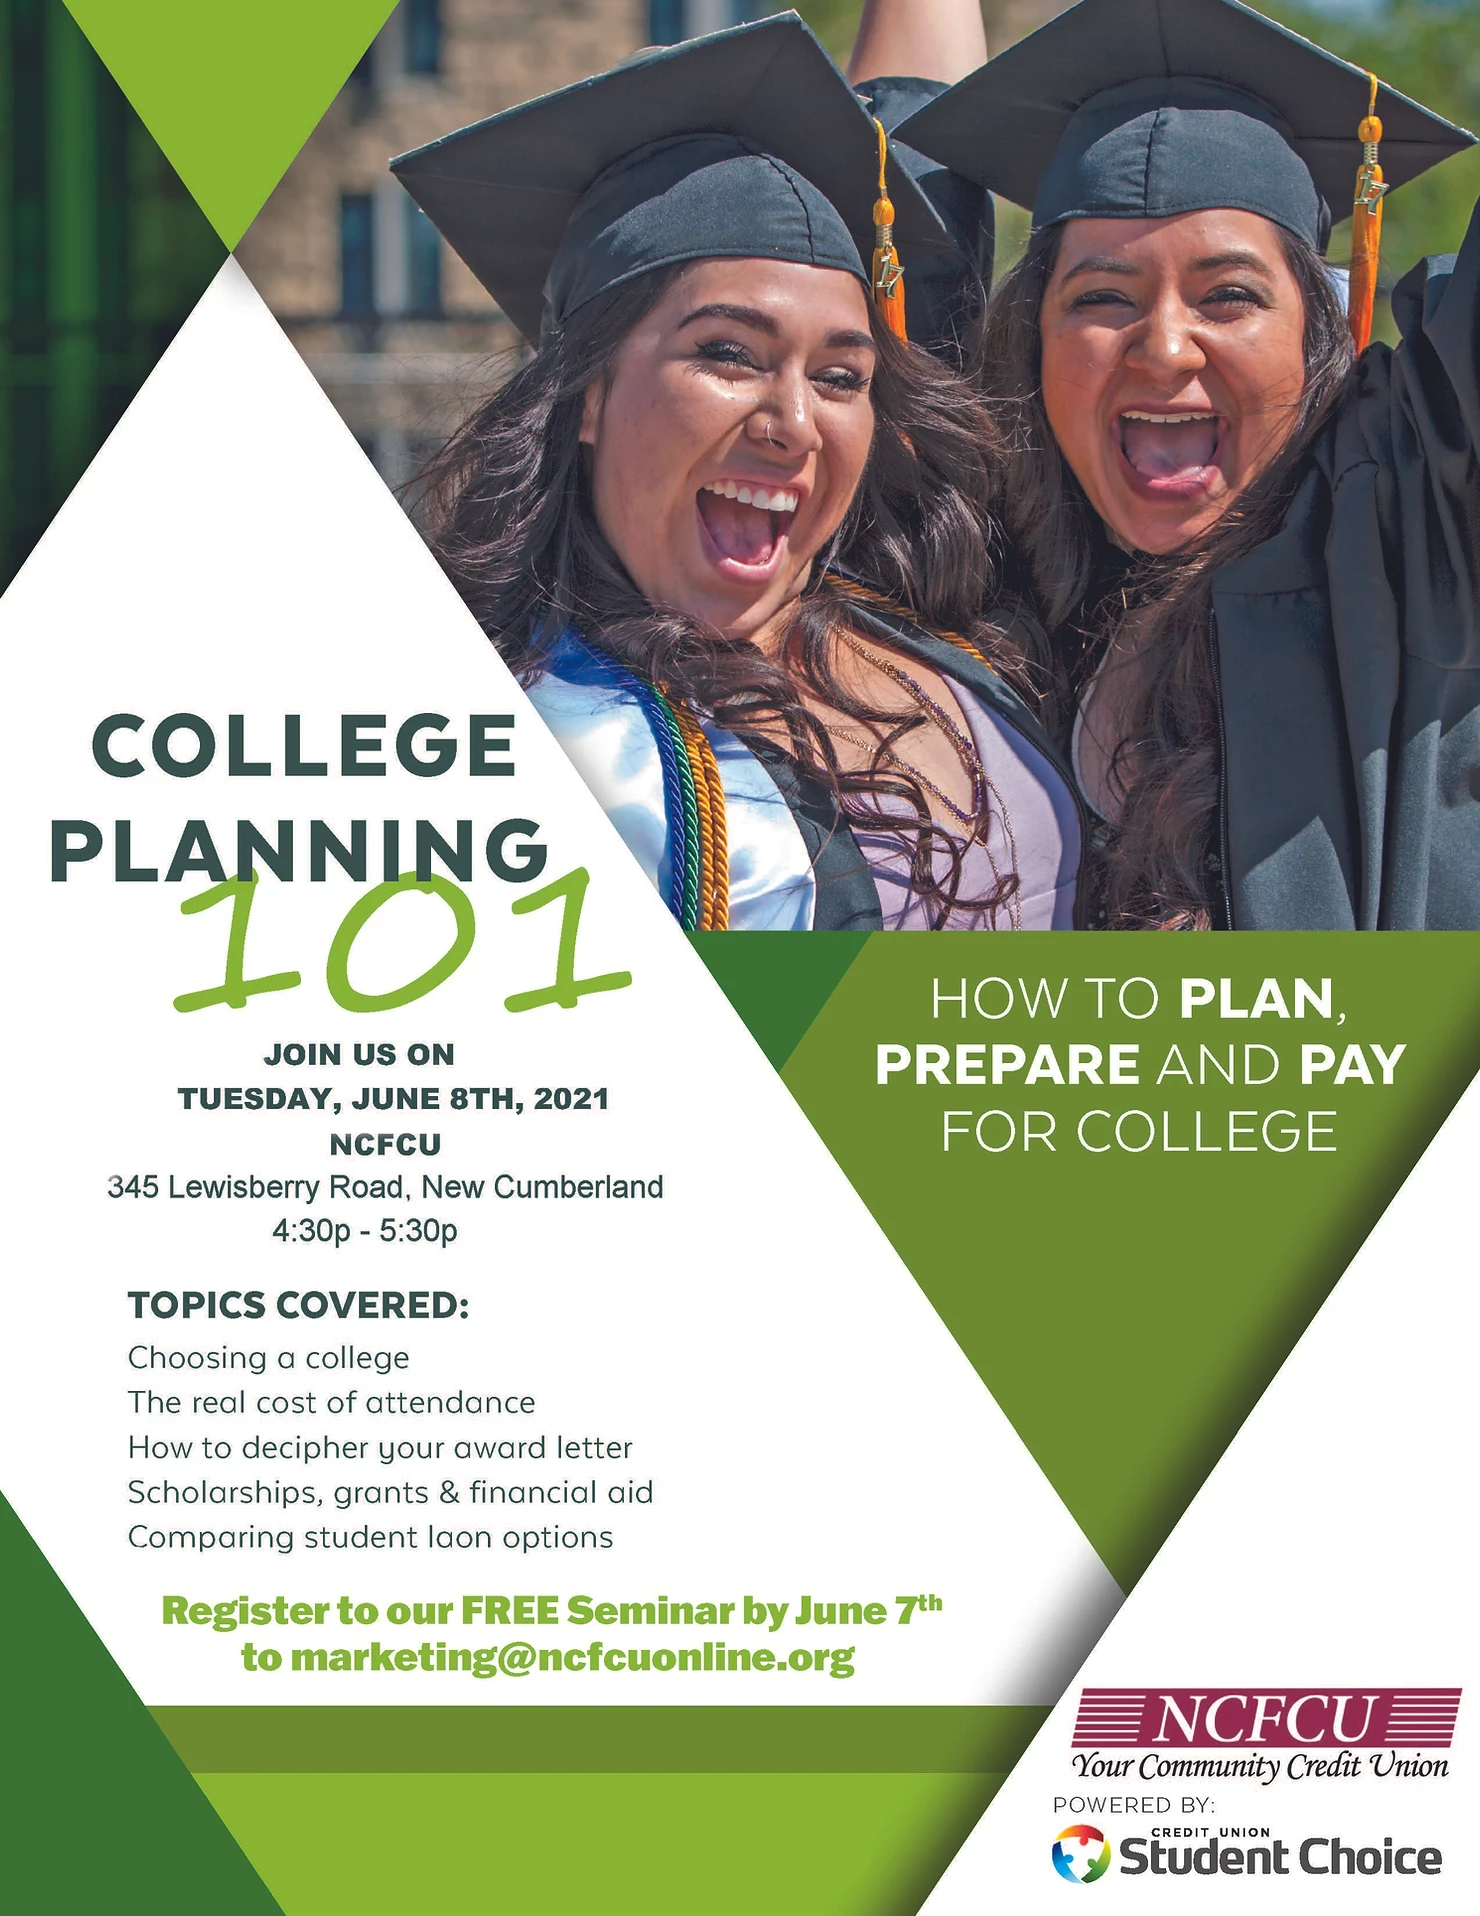 How to Plan, Prepare and Pay for College: Attend our FREE seminar on June 8th, 2021 featured image